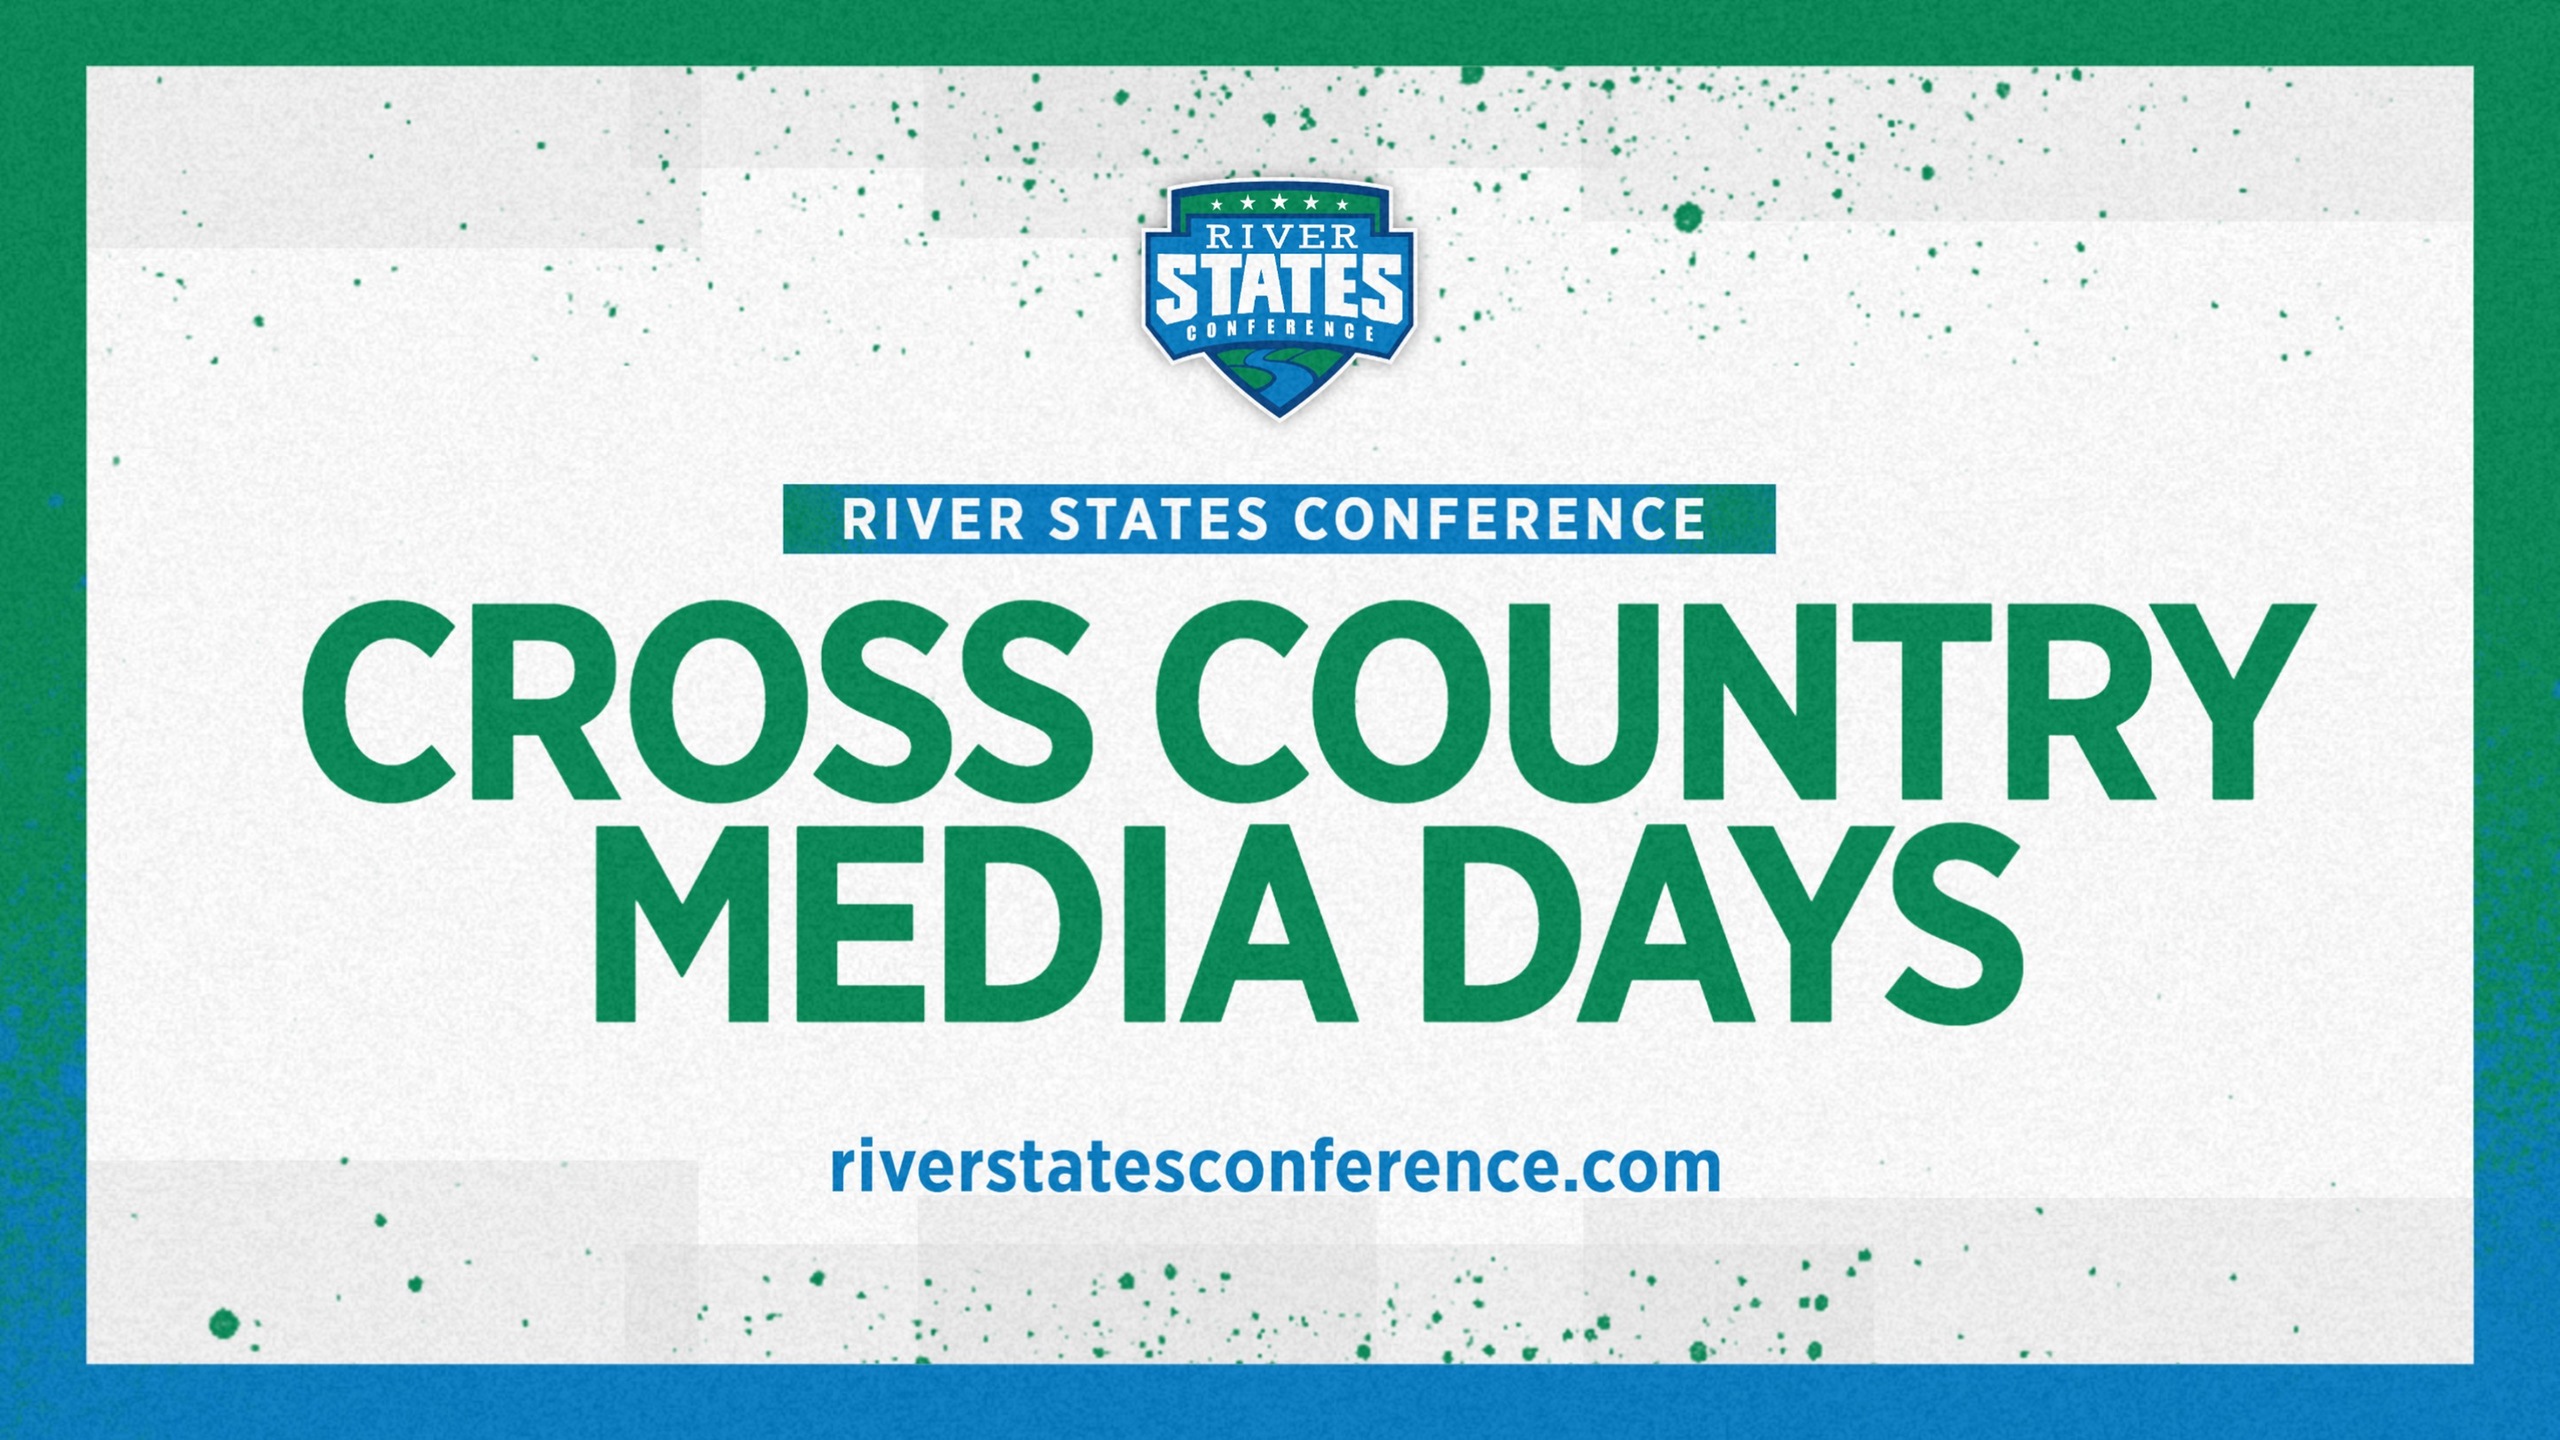 RSC M+W Cross Country Media Day: Sept. 13, 2023 at RiverStatesConference.com